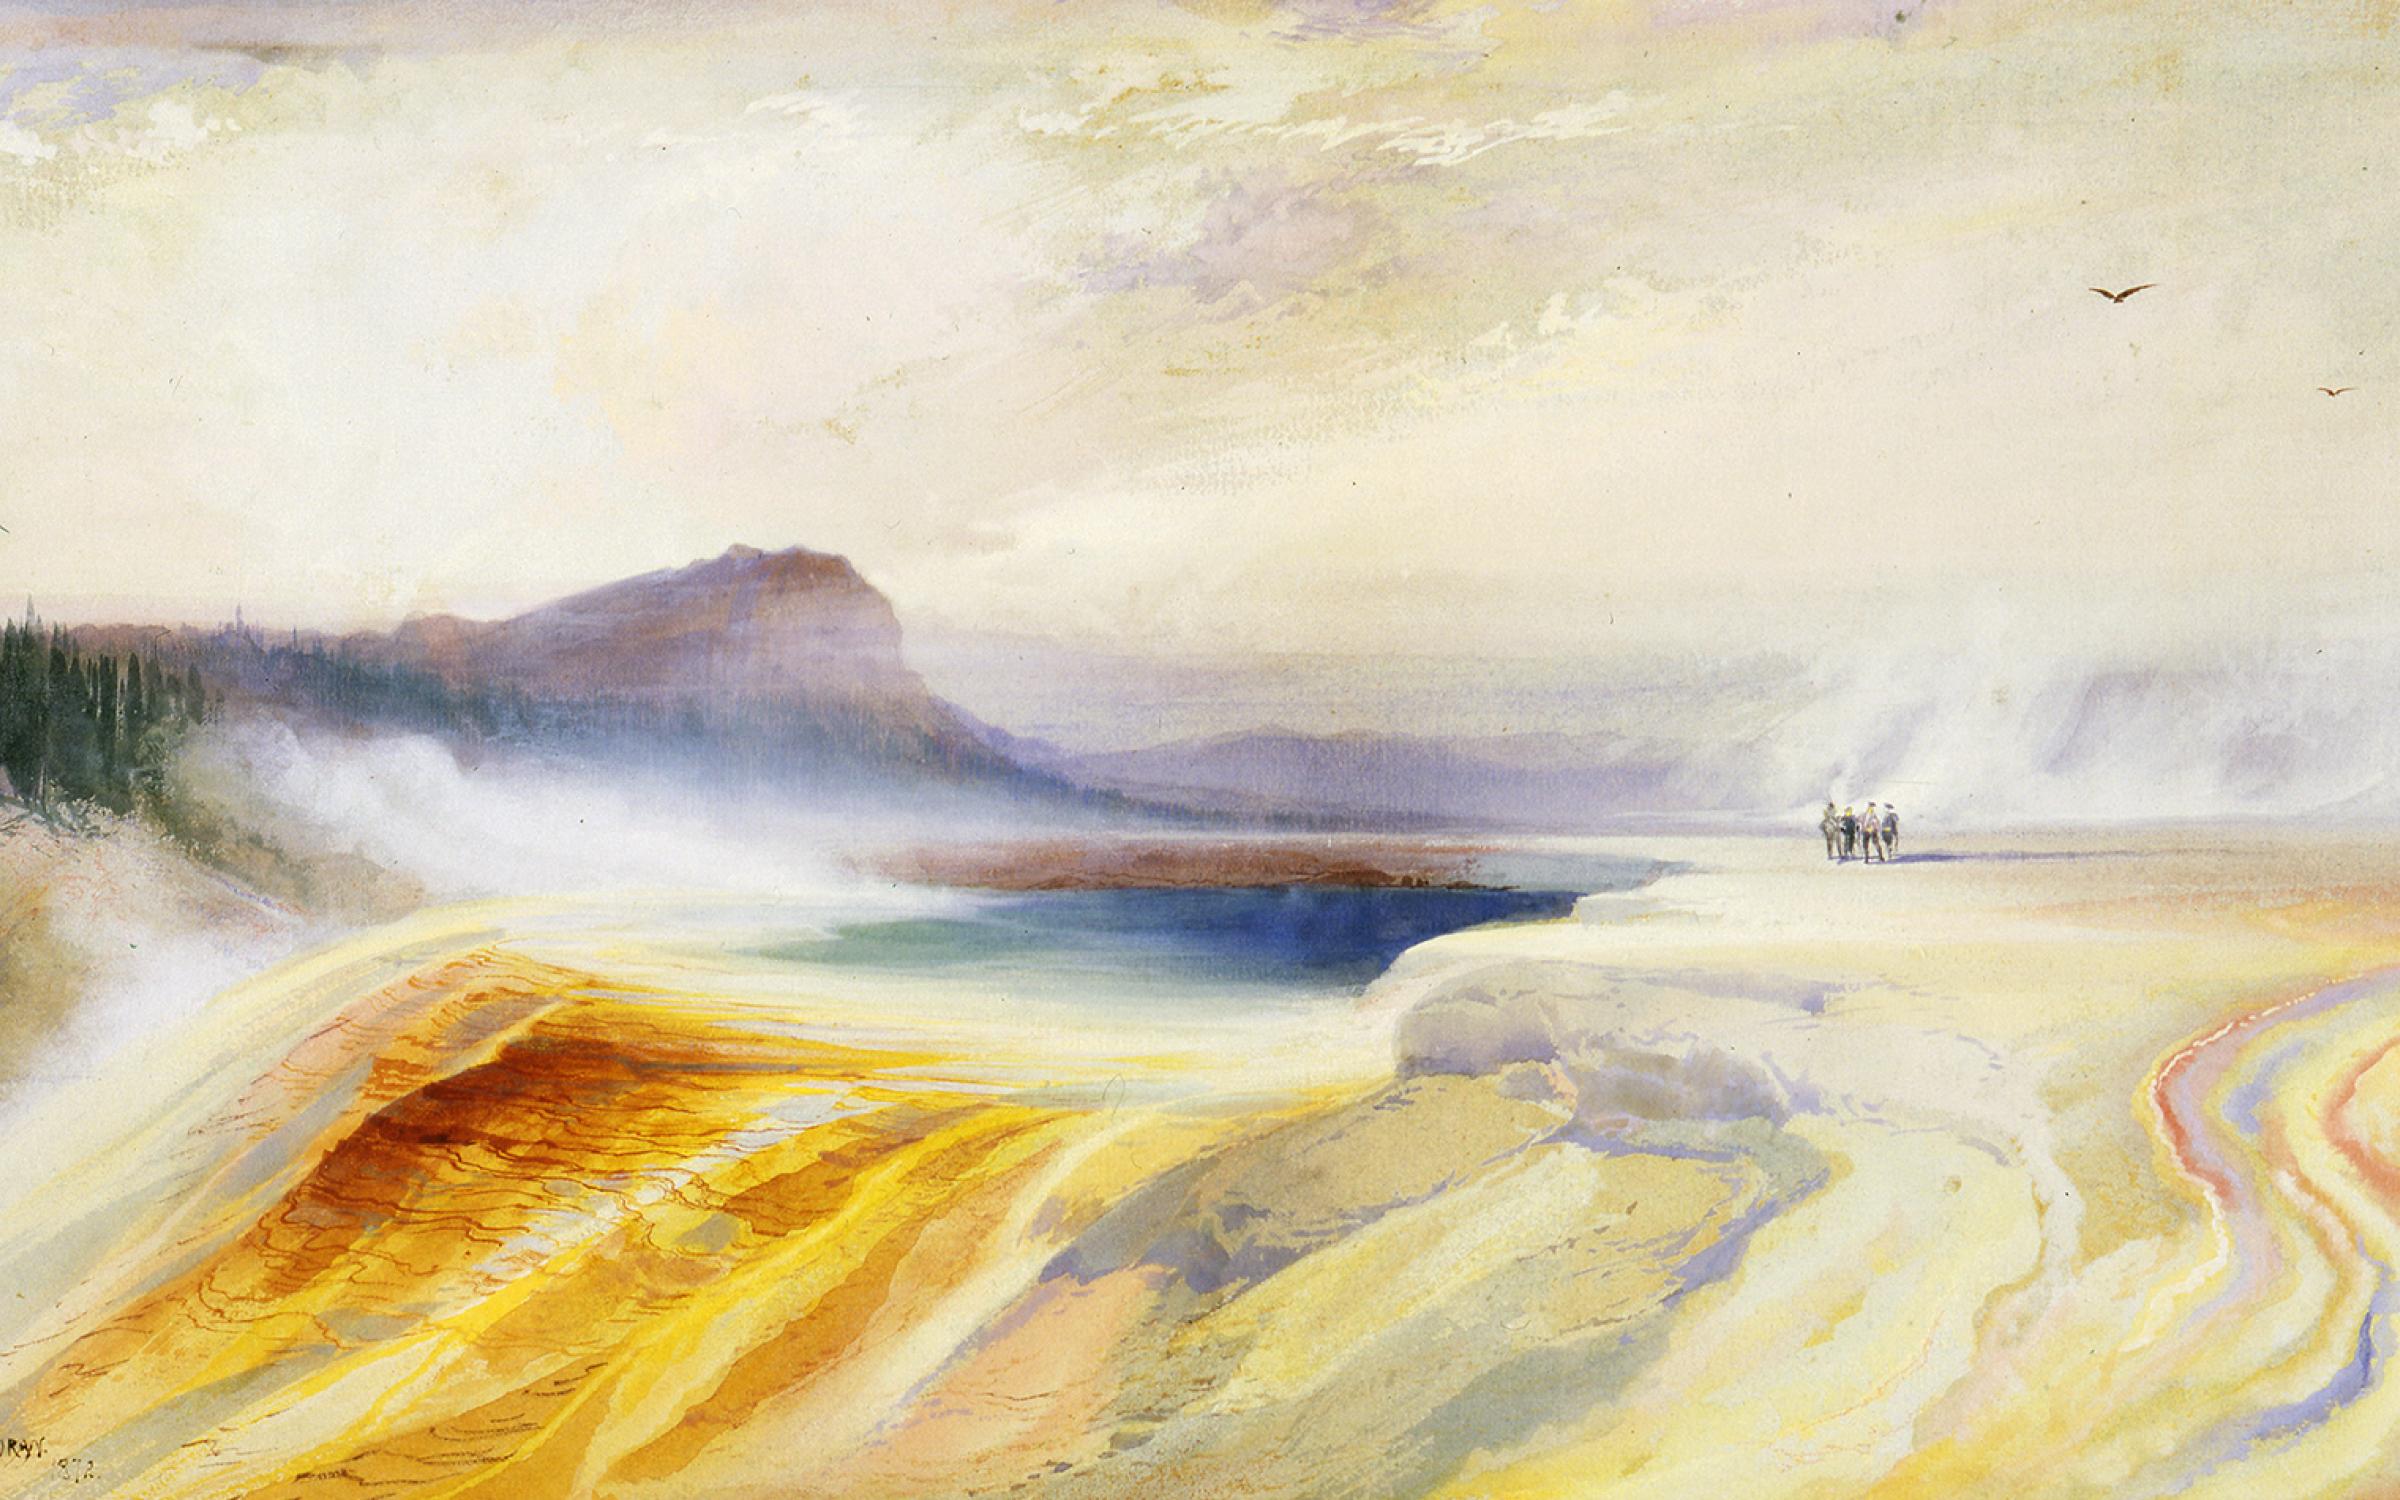 Thomas Moran, "Great Blue Spring of the Lower Geyser Basin, Firehole River, Yellowstone," 1872, watercolor on paper.